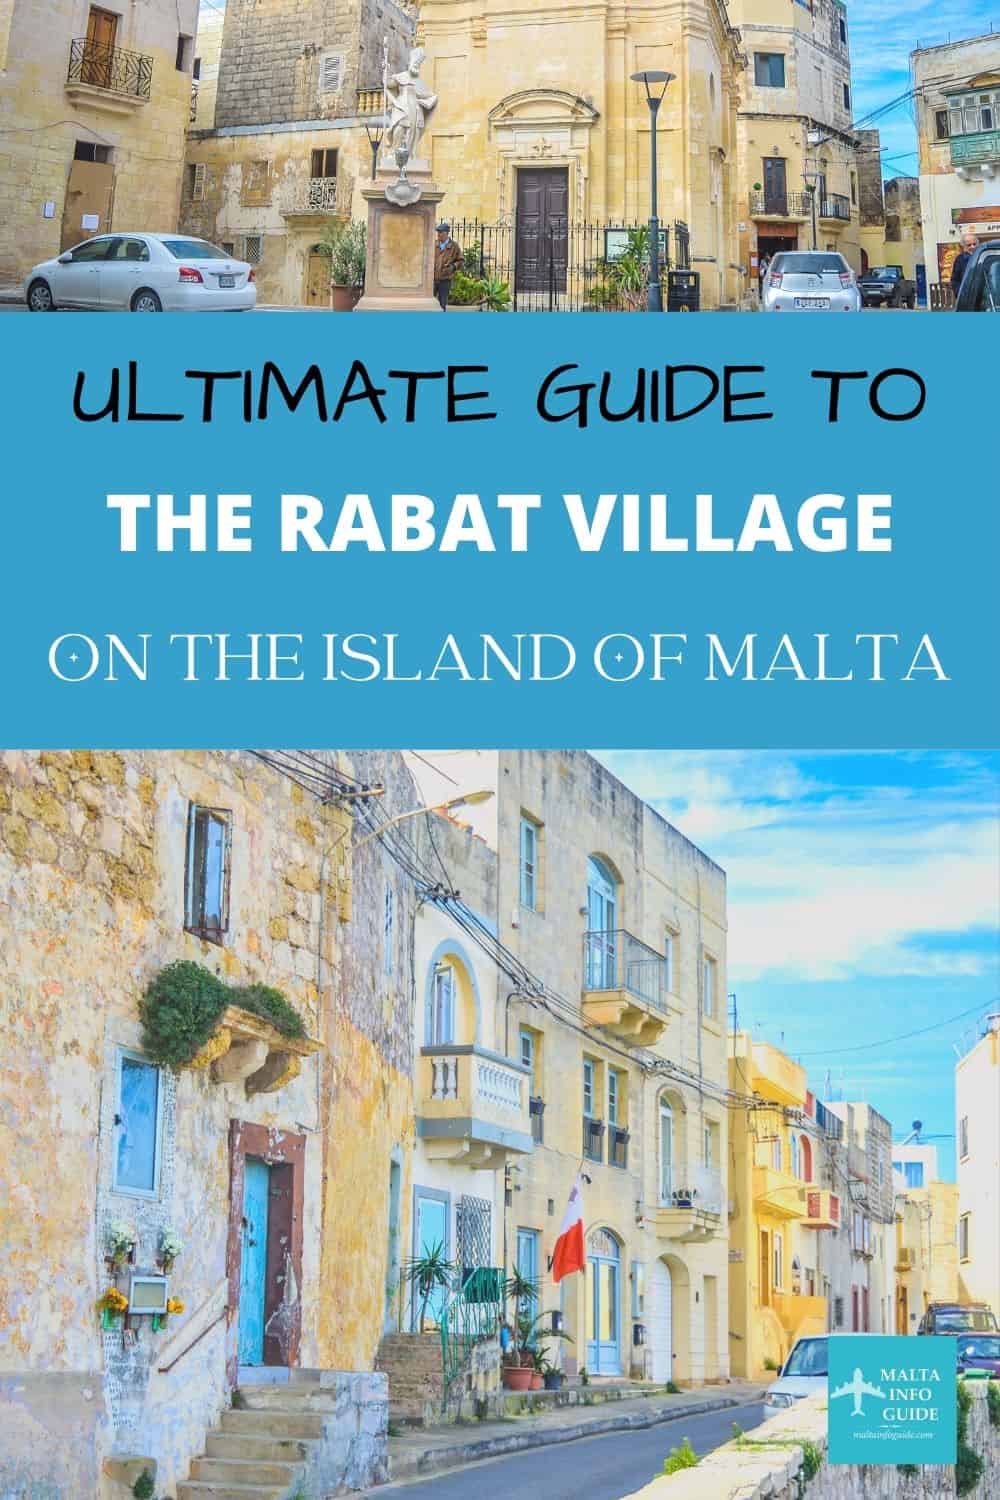 Visit the village of Rabat Malta. Located near the popular city of Mdina. Here is a guide that will help your visit.